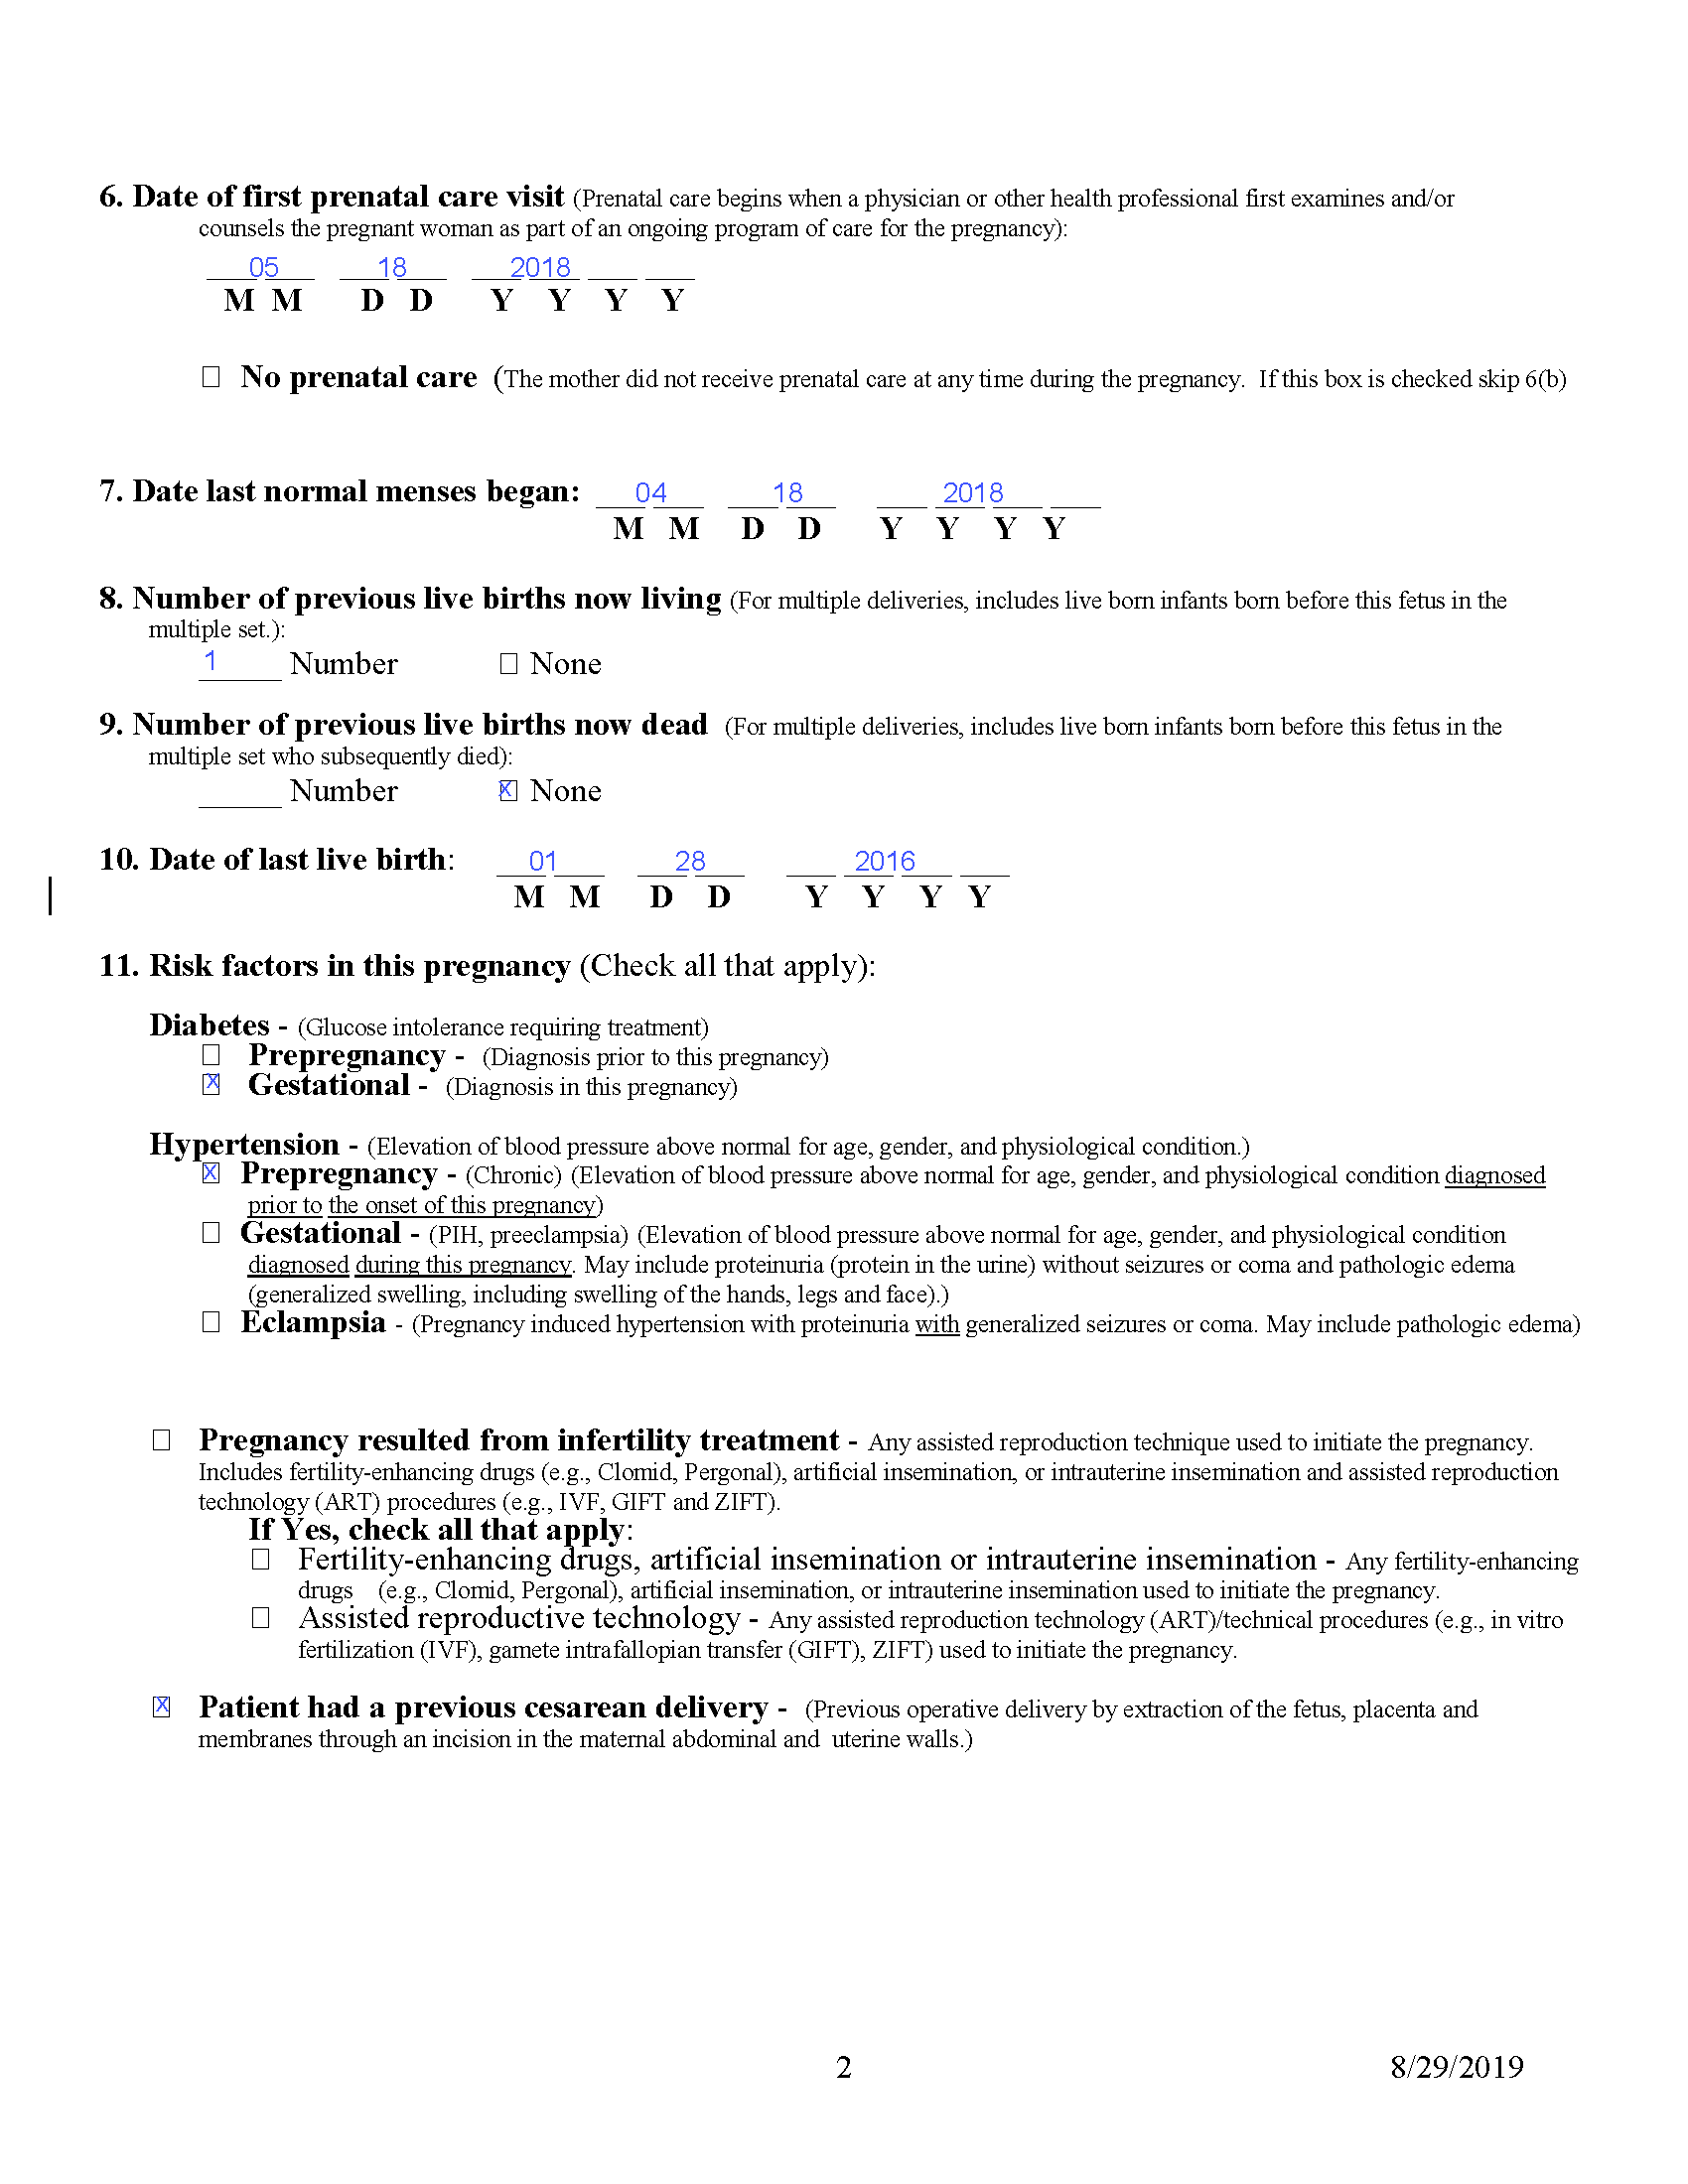 Example Facility Worksheet for Fetal Death Report - p2